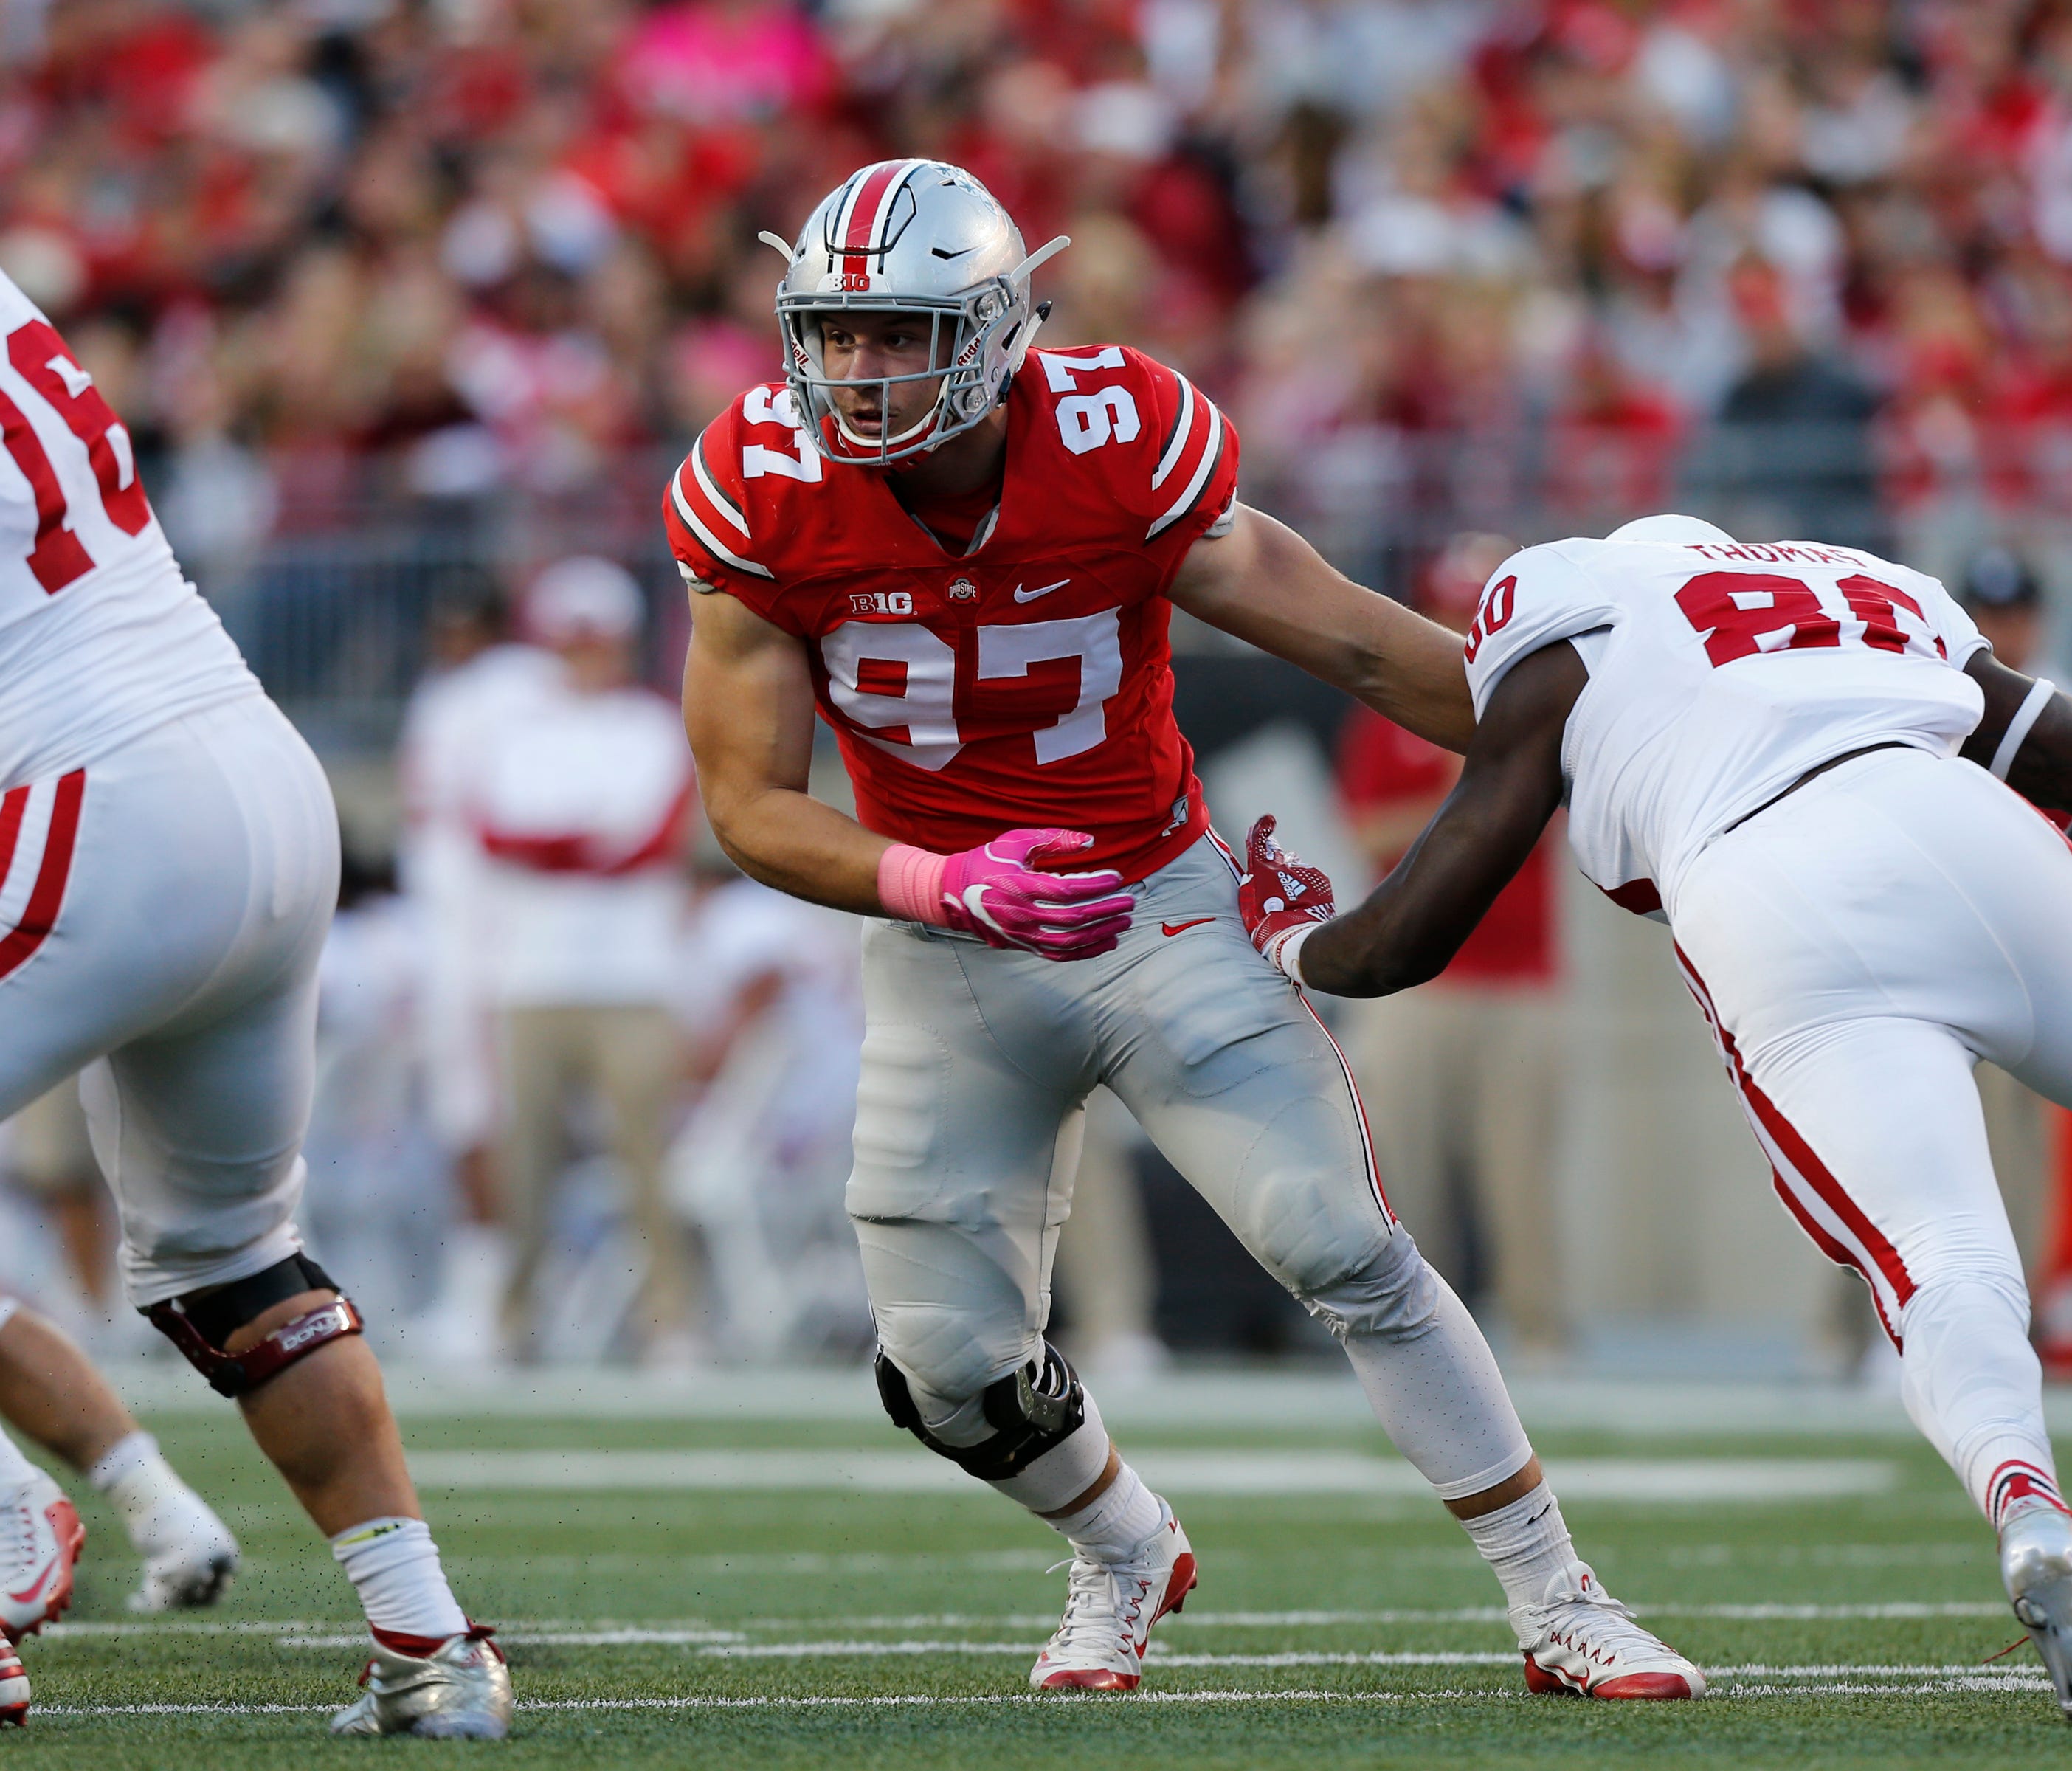 Ohio State defensive end Nick Bosa looks to make a tackle against Indiana in 2016.